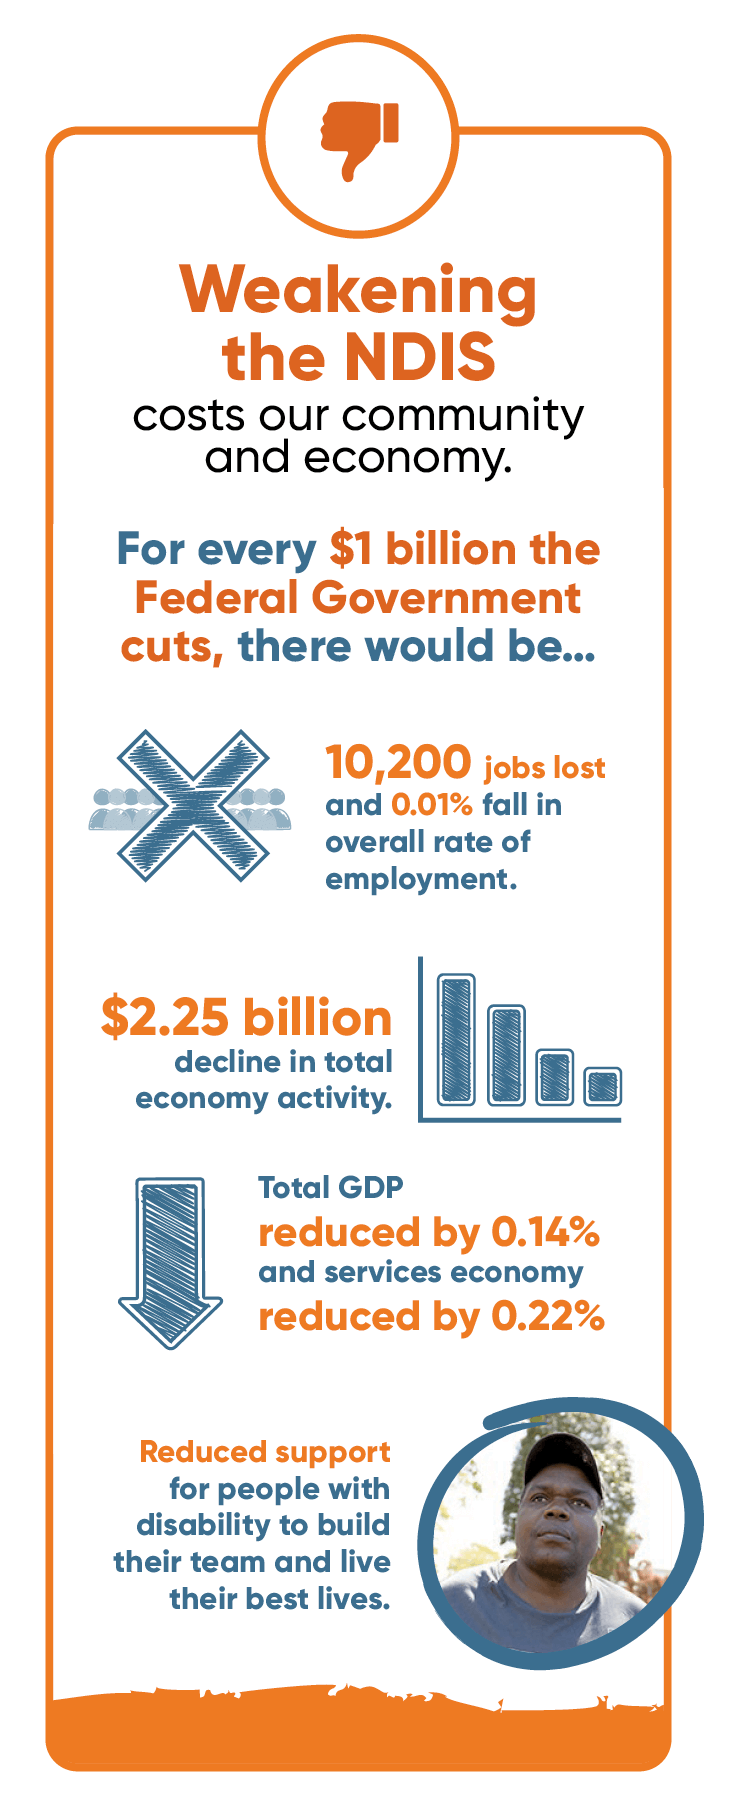 Weakening the NDIS costs our community and economy. For every $1billion the Federal Government cuts there would be 10,200 jobs lost and 0.01 per cent fall in overall rate of employment. 2.25 billion decline in total economy activity. Total GDP reduced by 0.14% and services economy reduced by 0.22%. Reduced support for people with disability to build their team and live their best lives. 